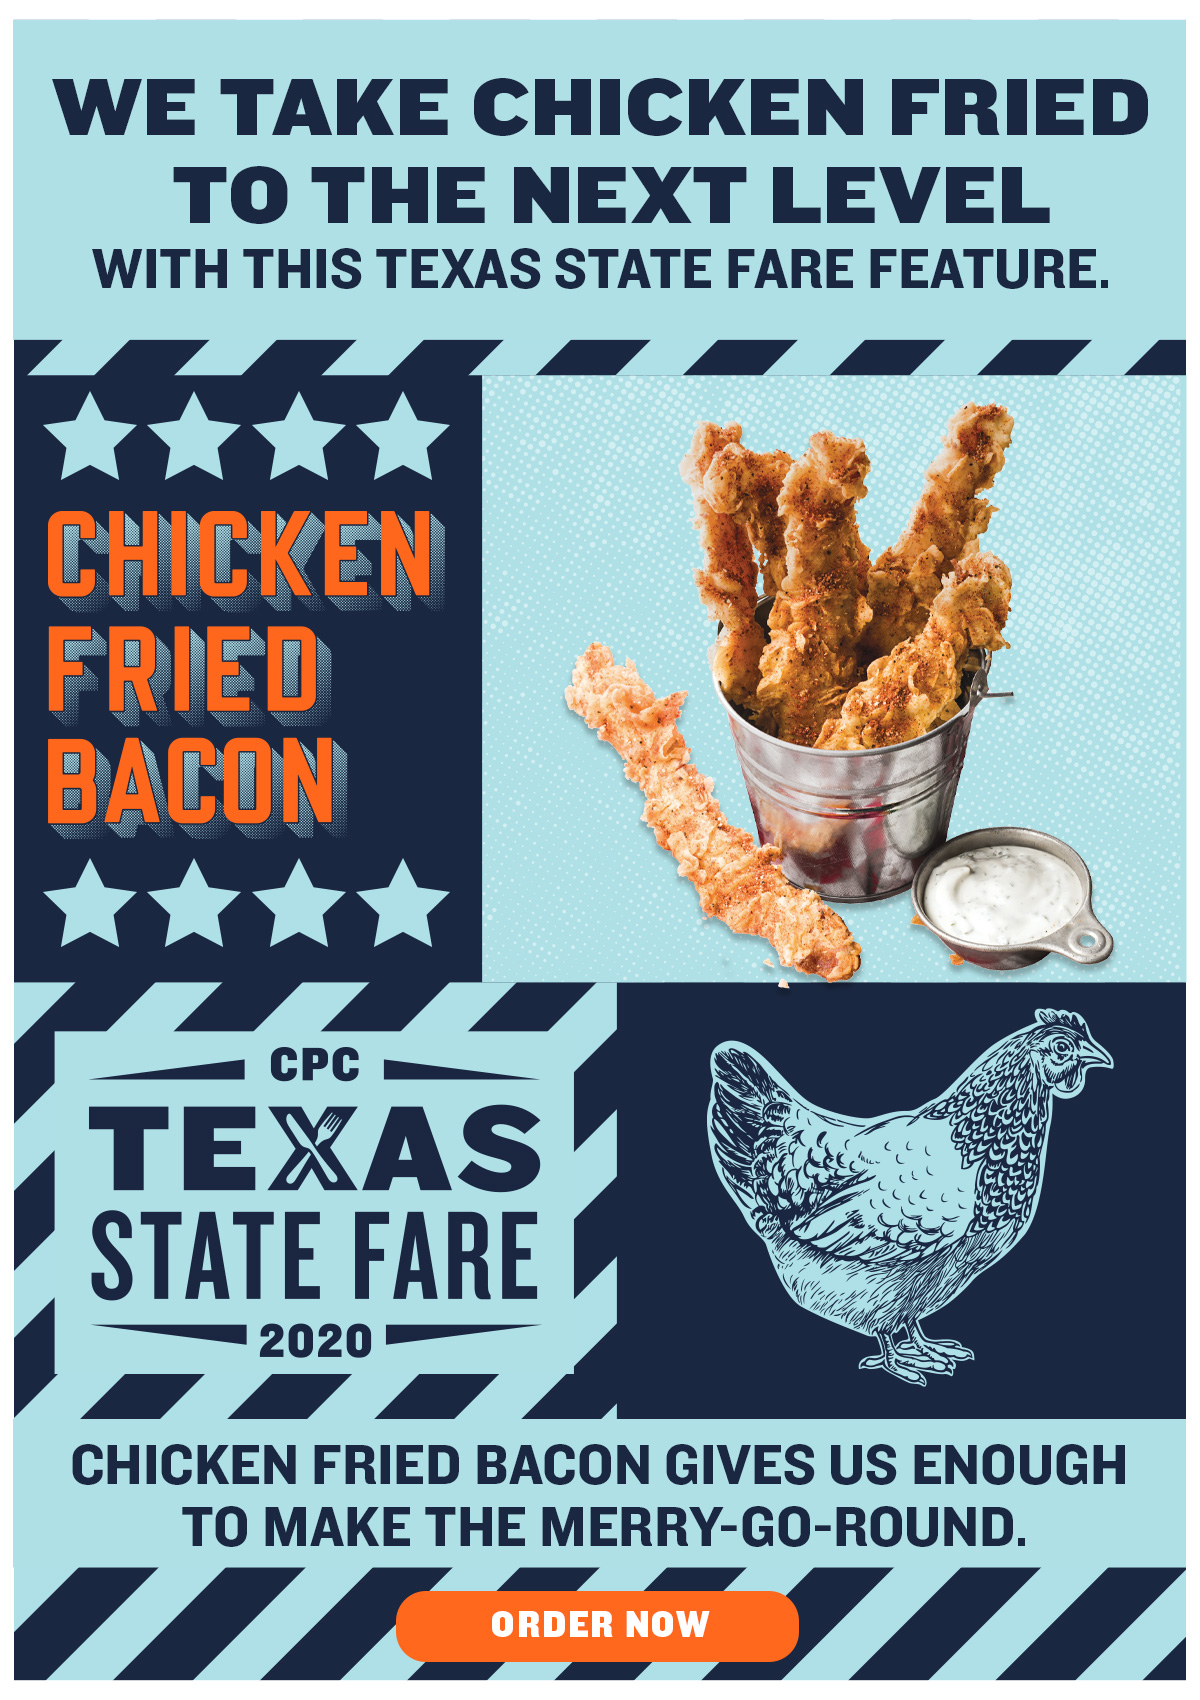 We take Chicken Fried to the next level with this Texas State Fare feature. Chicken Fried Bacon gives us enough joy to make the merry-go-round.